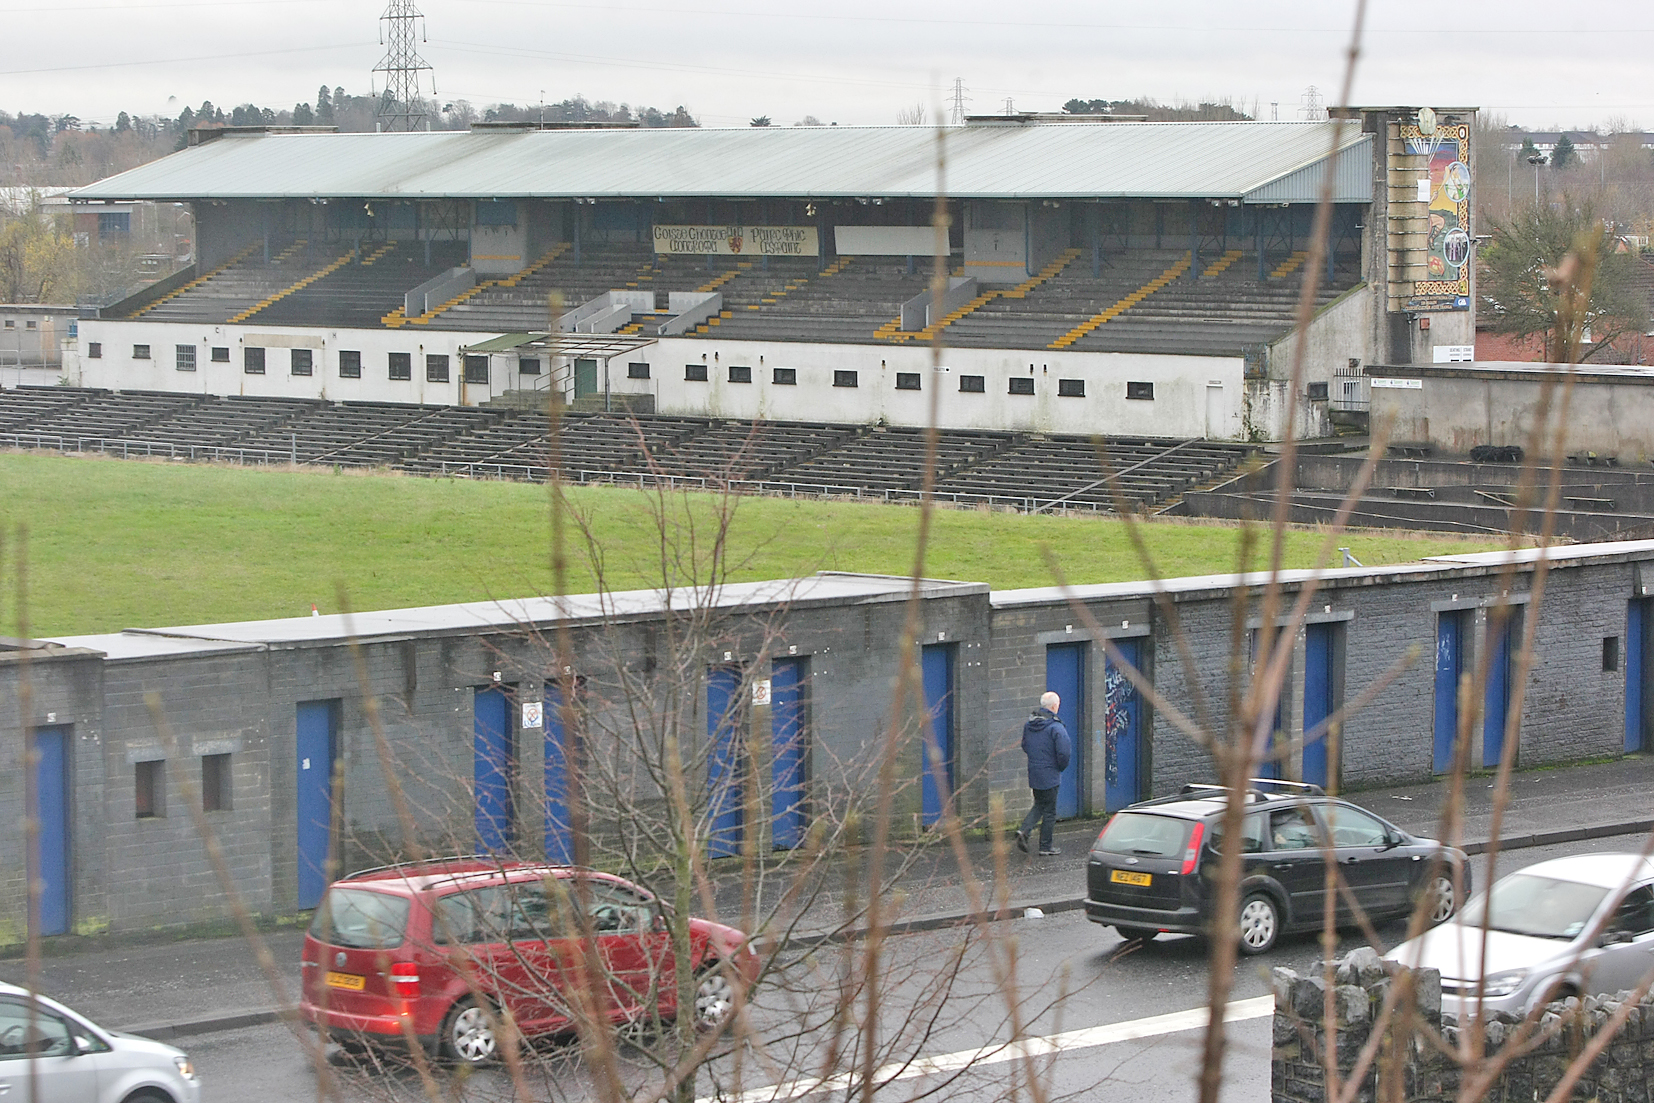 The £70 million redevelopment of Casement Park has been put on hold as wrangling continues over its capacity